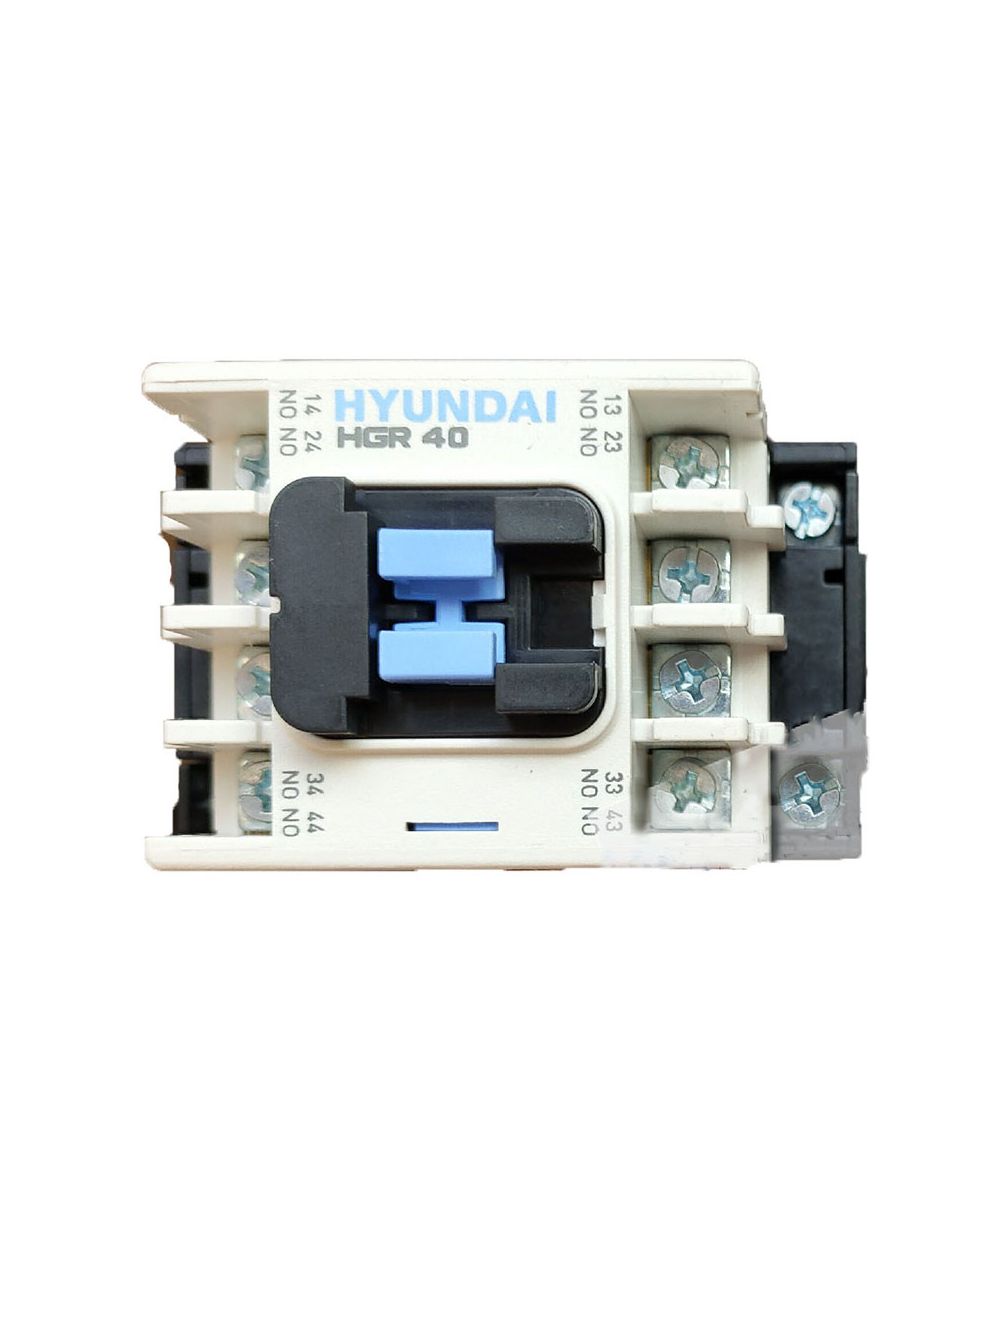 New In stock for sale, HYUNDAI Contactor HGR40